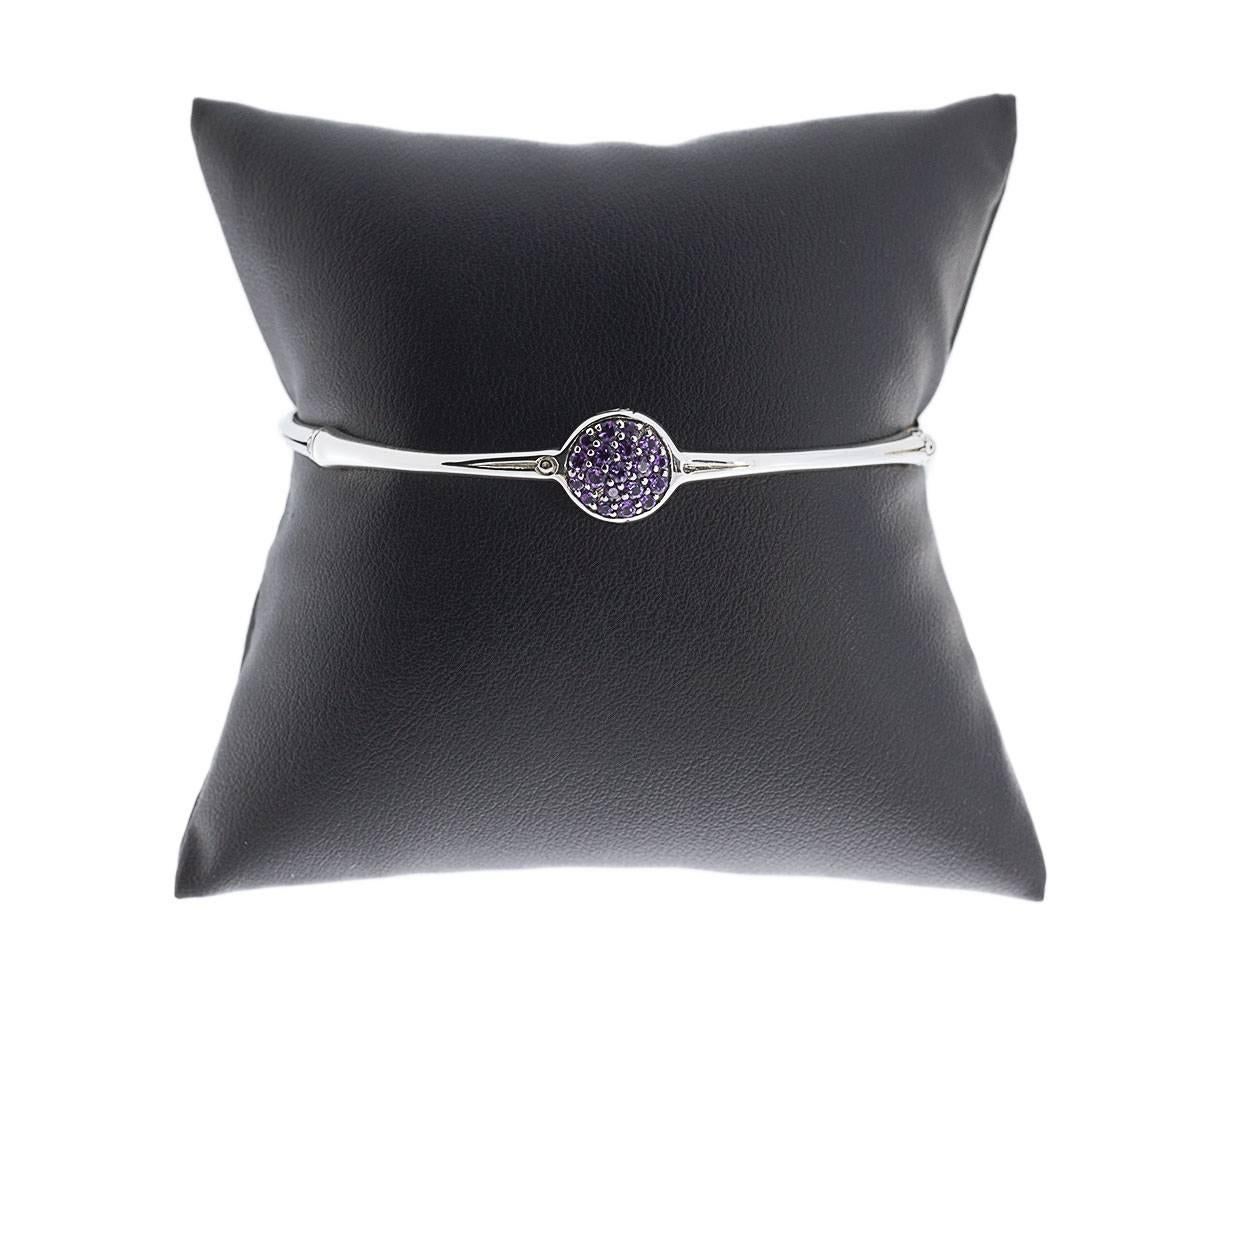 Each piece of John Hardy jewelry has been crafted in Bali since 1975. John Hardy is dedicated to creating timeless one-of-a-kind pieces that are brilliantly alive. 

This sterling silver amethyst bangle bracelet is from John Hardy's Bamboo